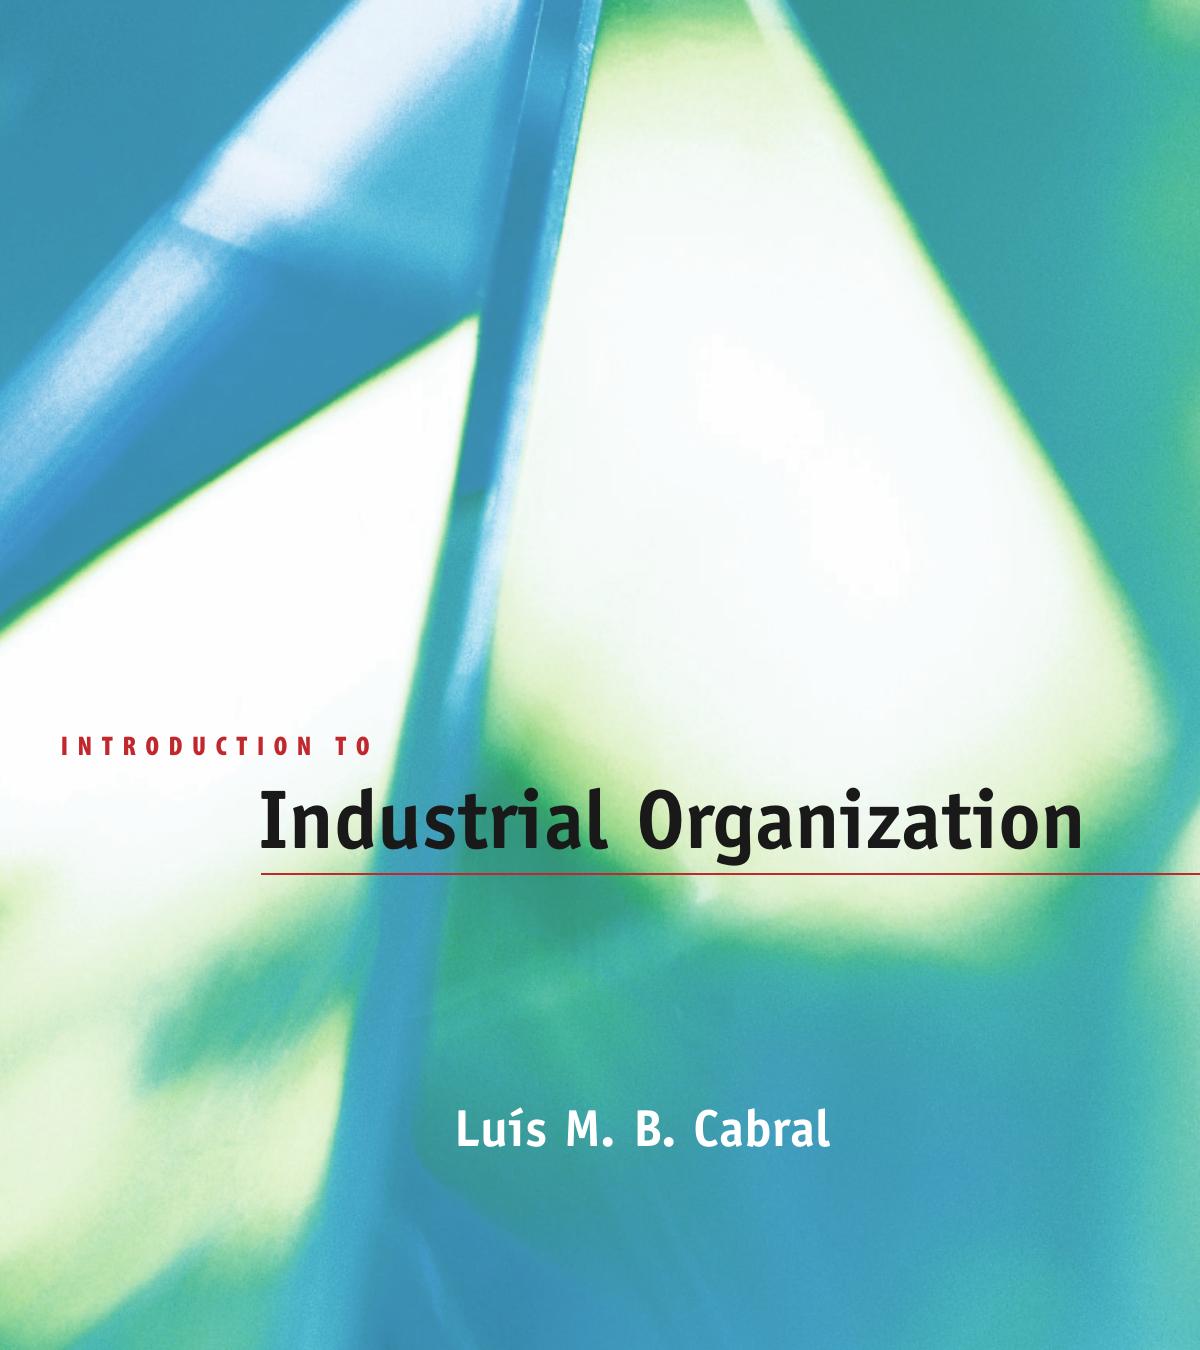 Introduction to Industrial Organization 2000